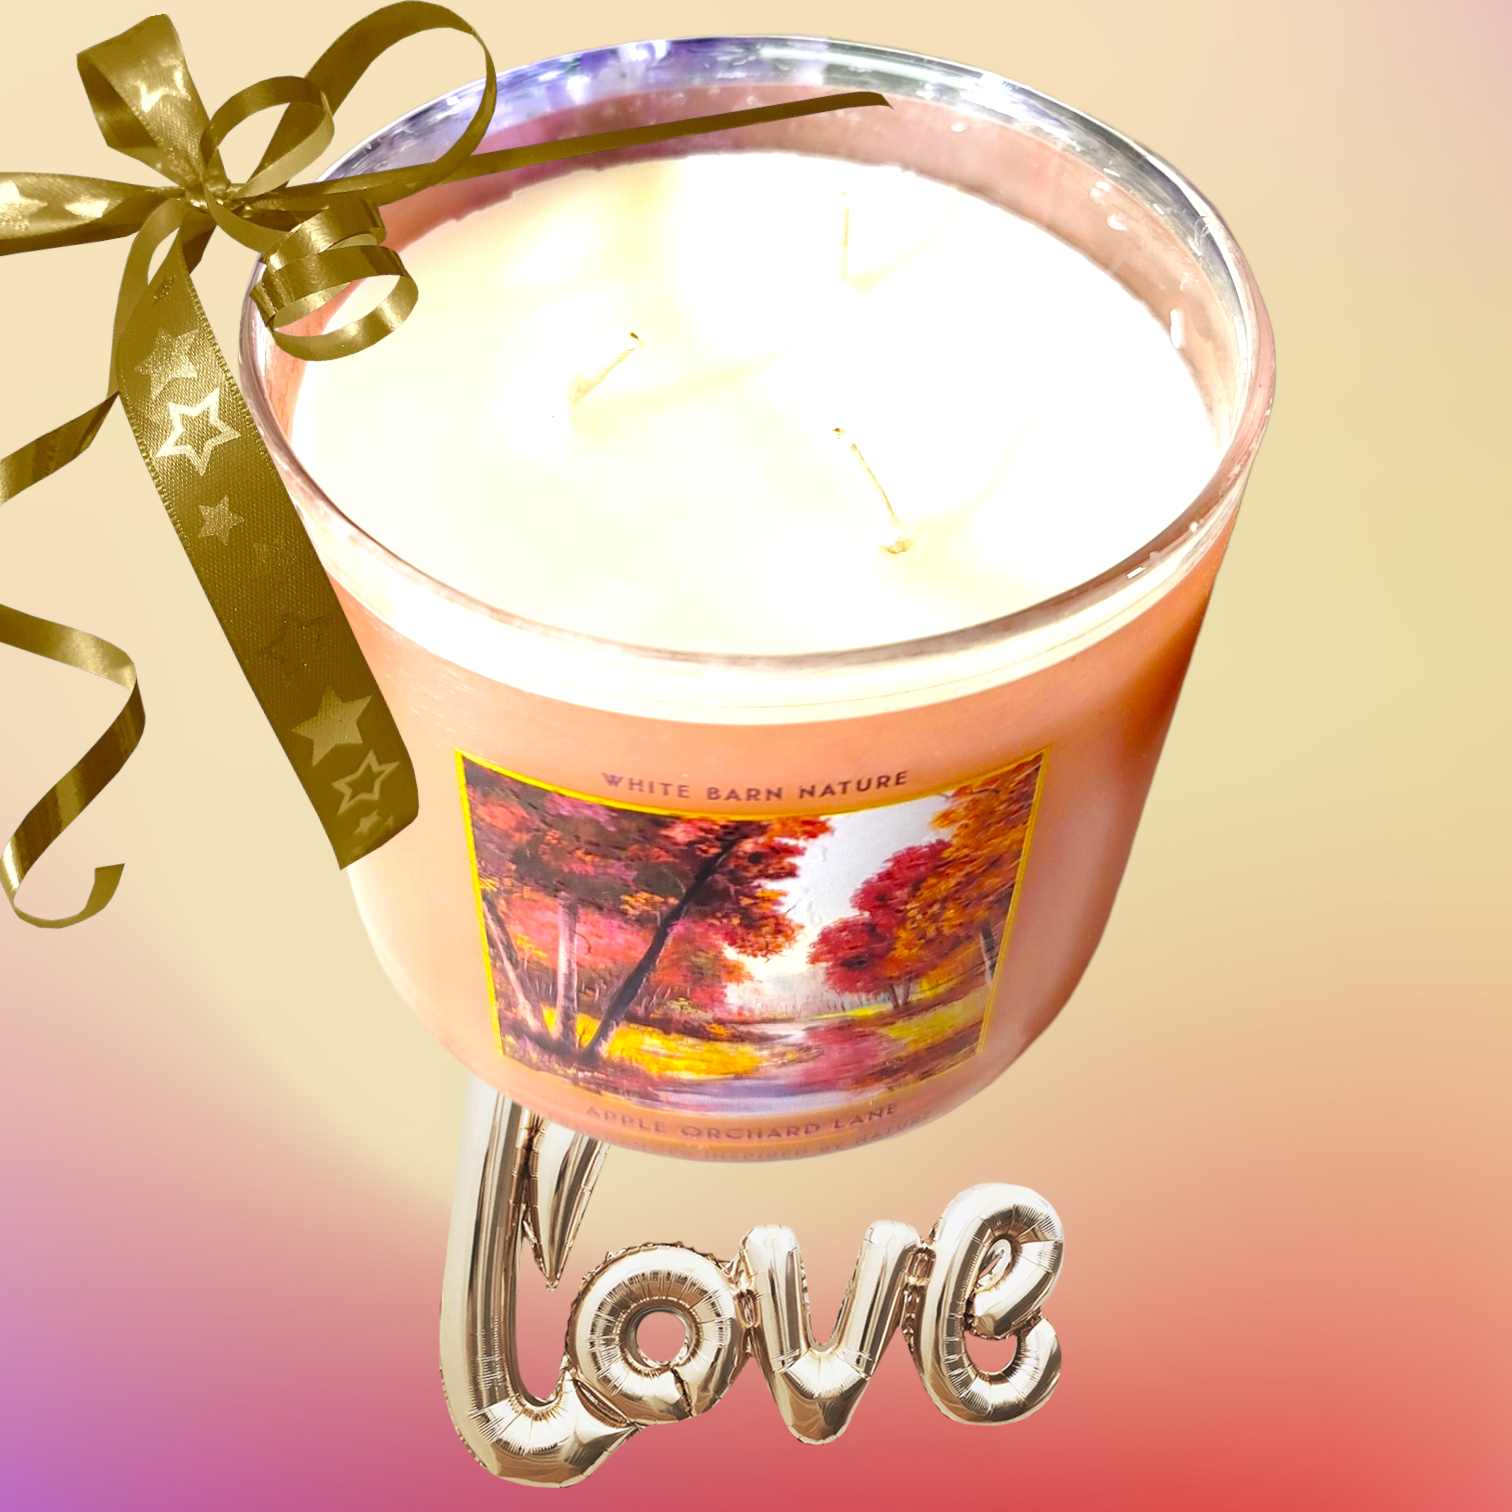 Apple Orchard Lane Wick Candle 2022